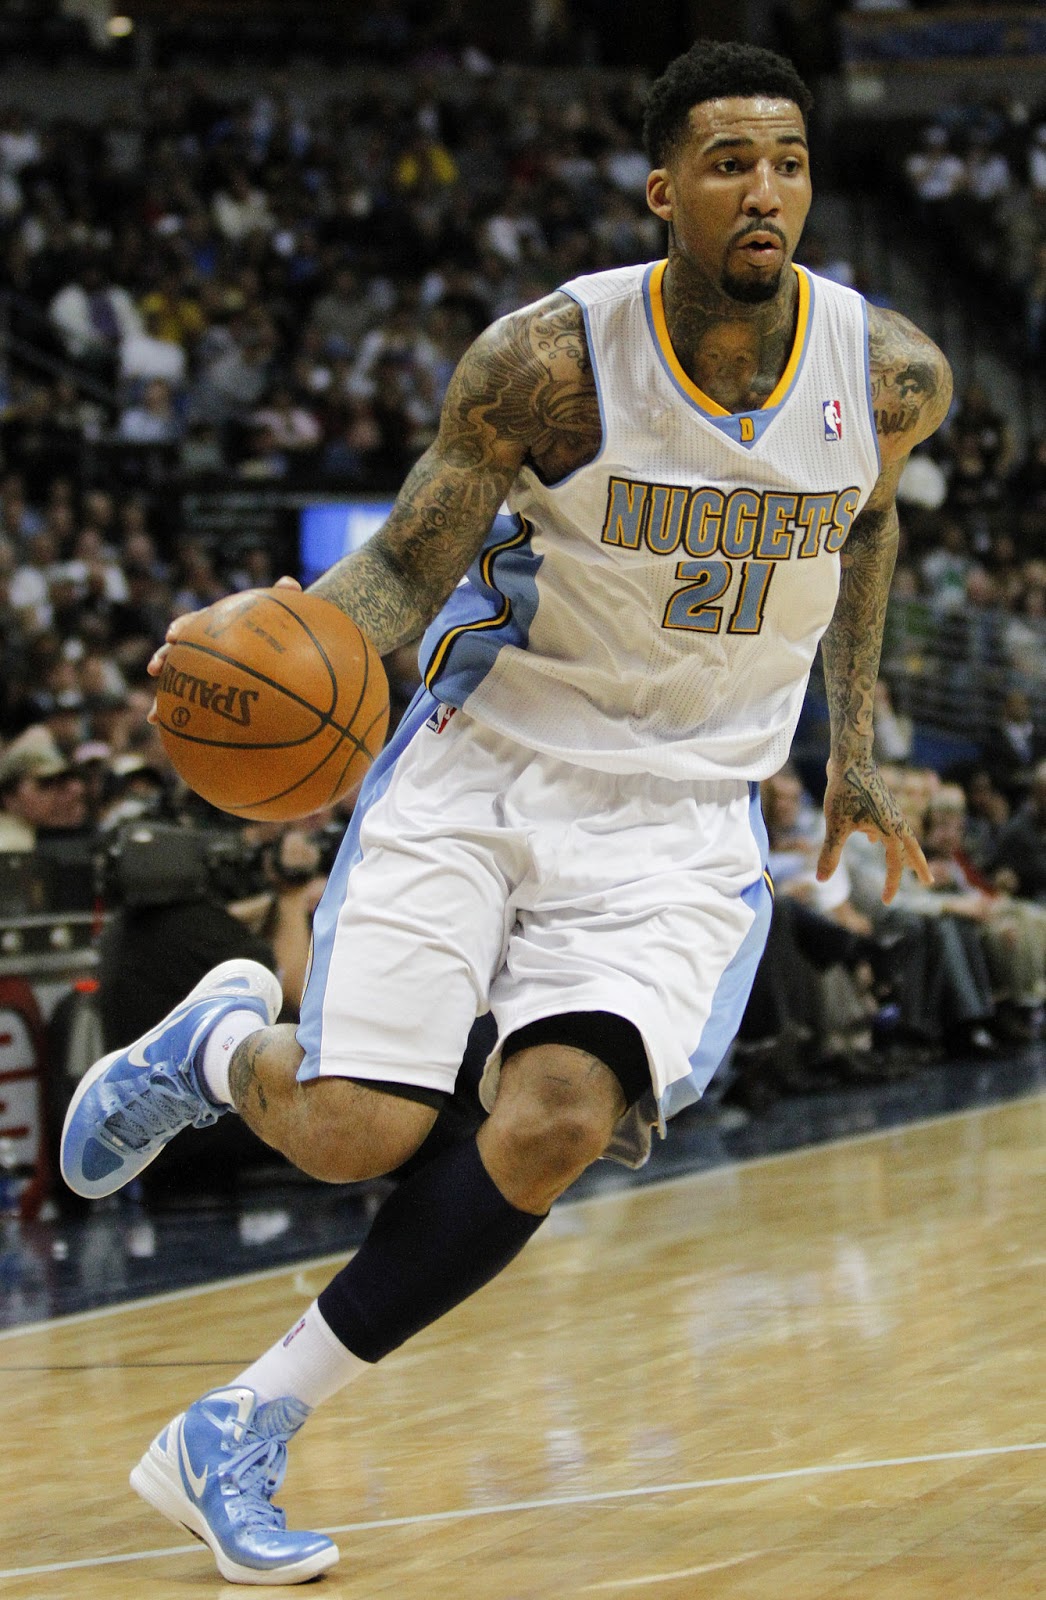 Wilson Chandler Profile And New Photos 2013 | All Basketball Players Latest HD Wallpapers1046 x 1600